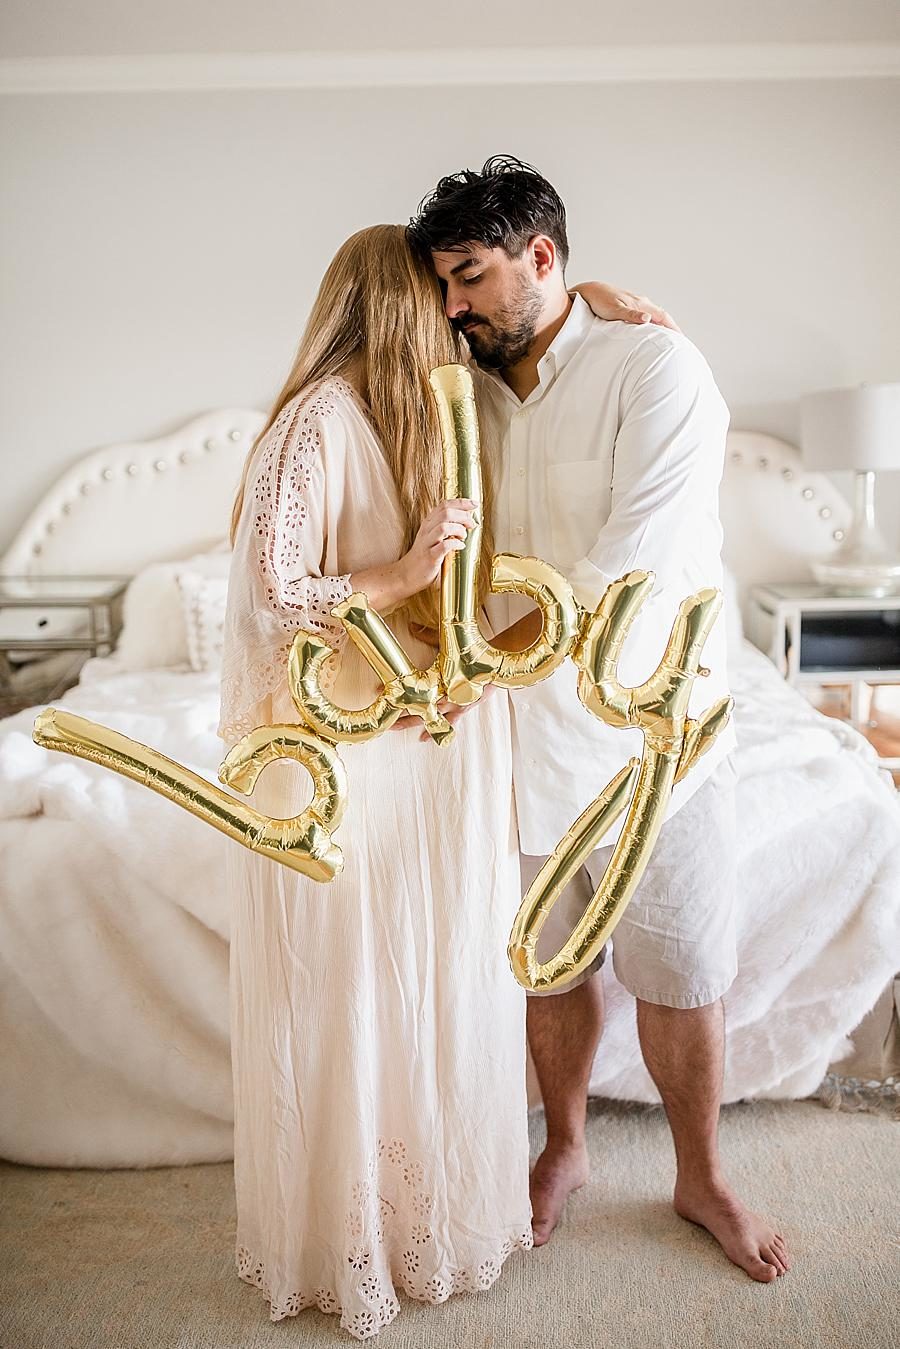 Baby balloon at this Lifestyle Maternity Session by Knoxville Wedding Photographer, Amanda May Photos.